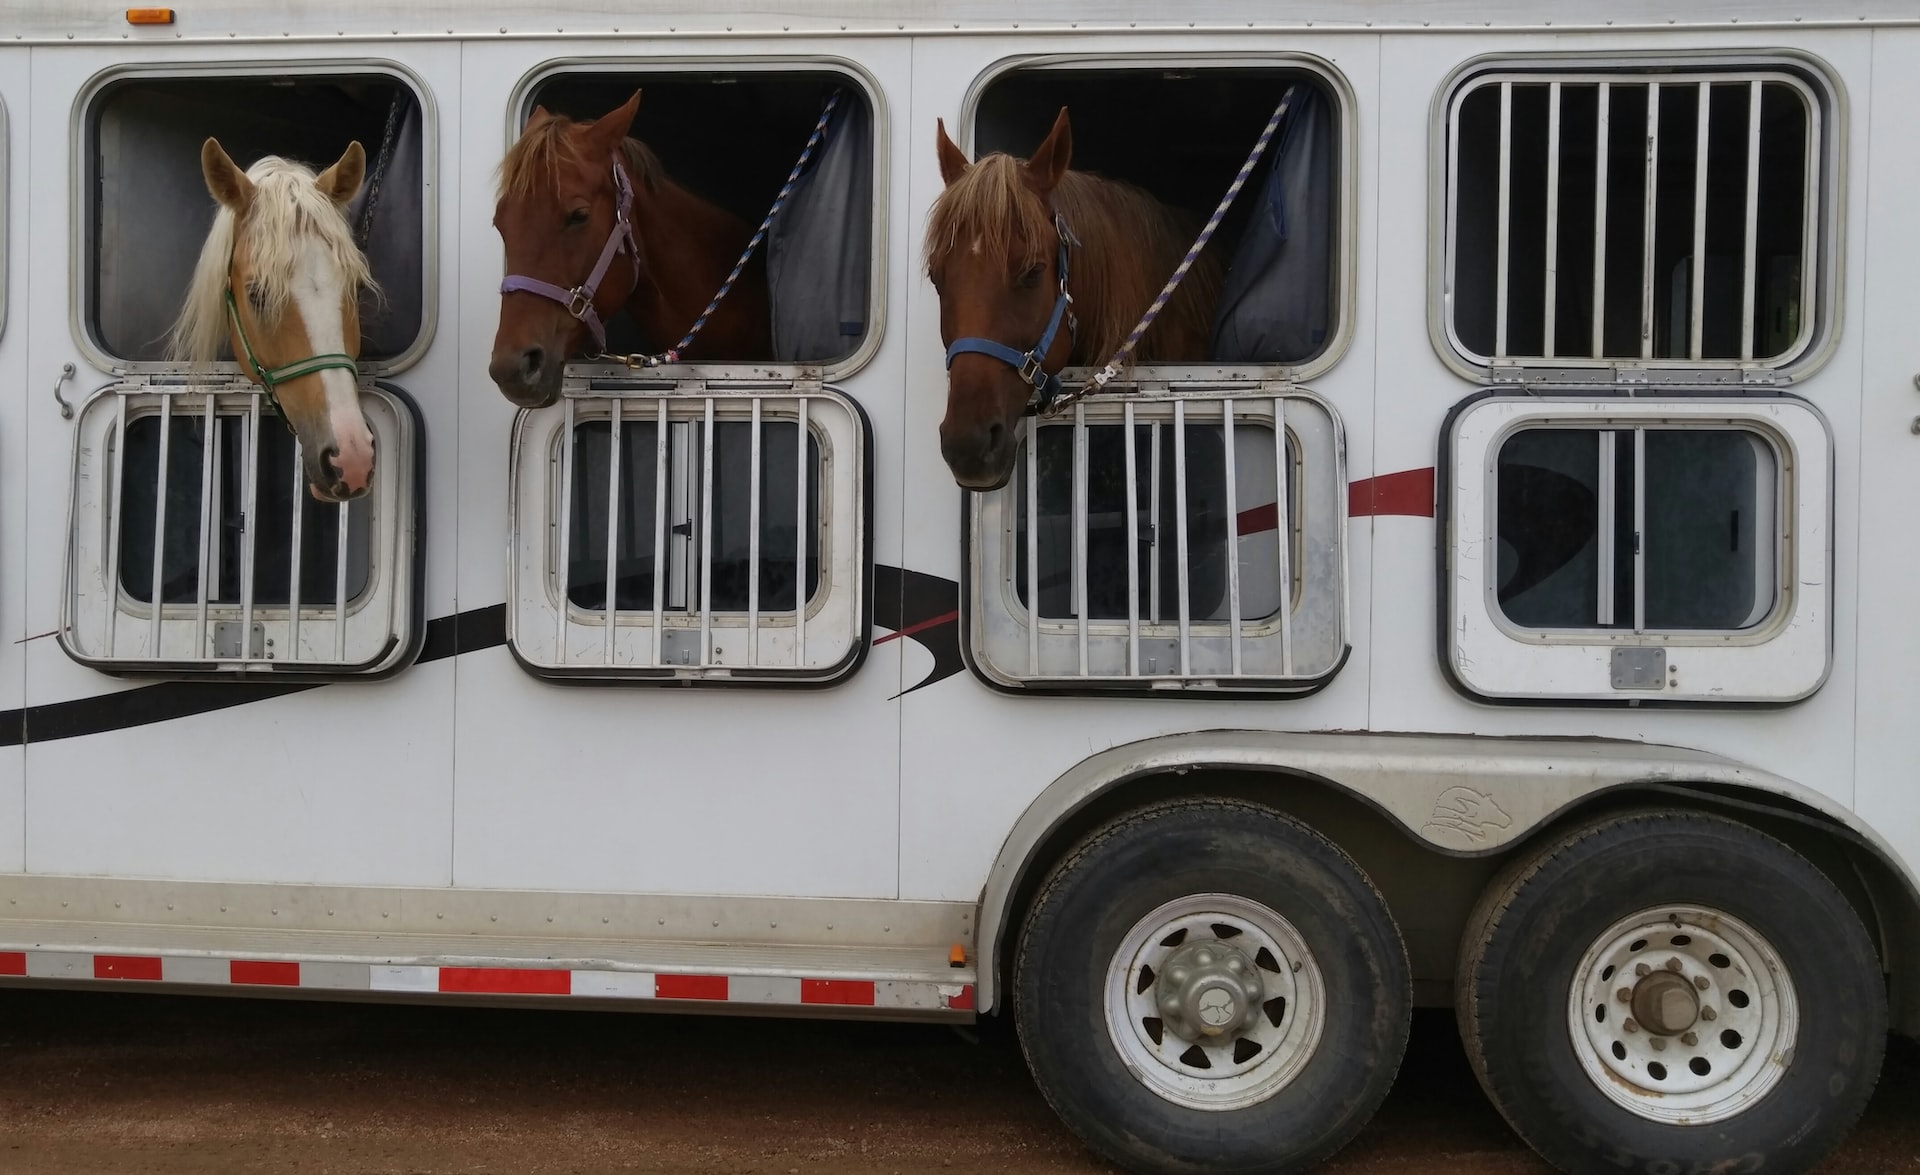 I just had to capture these guys! It cracks me up that I see more horses being transferred than I do people riding horses | Veteran Car Donations